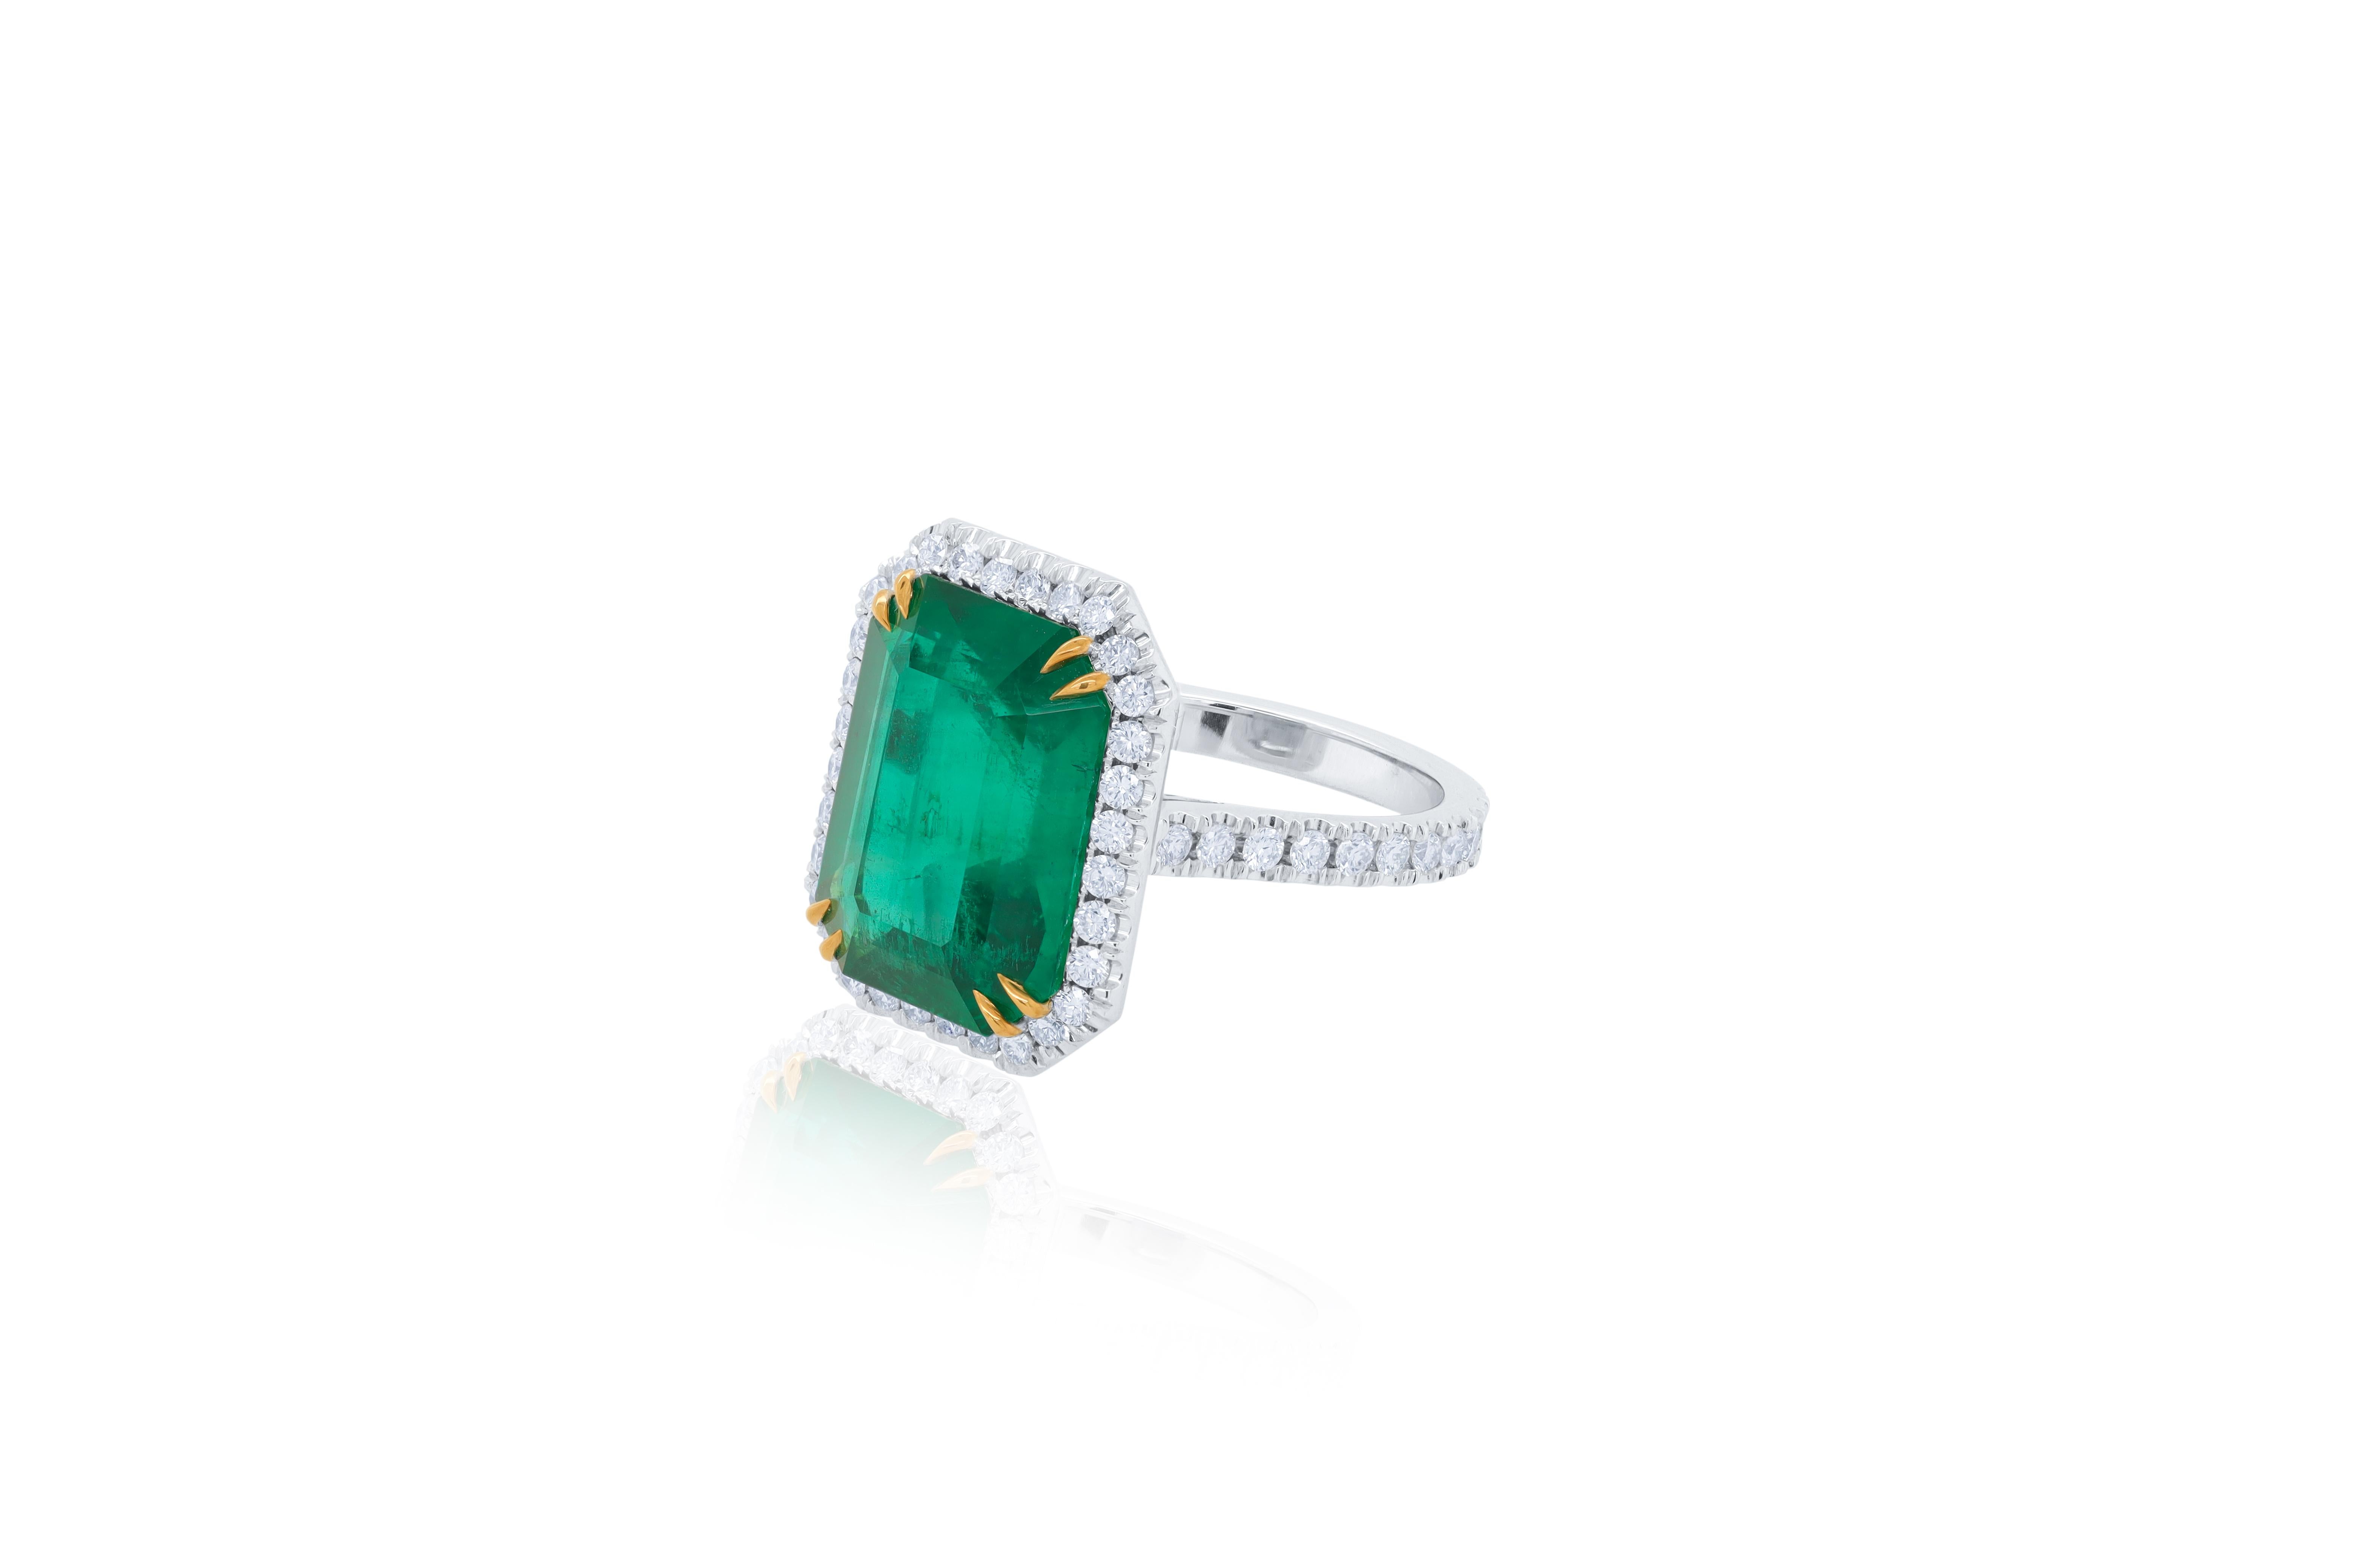 Emerald Cut Diana M. Platinum and 18 kt yellow gold emerald diamond ring featuring a 9.11 ct For Sale